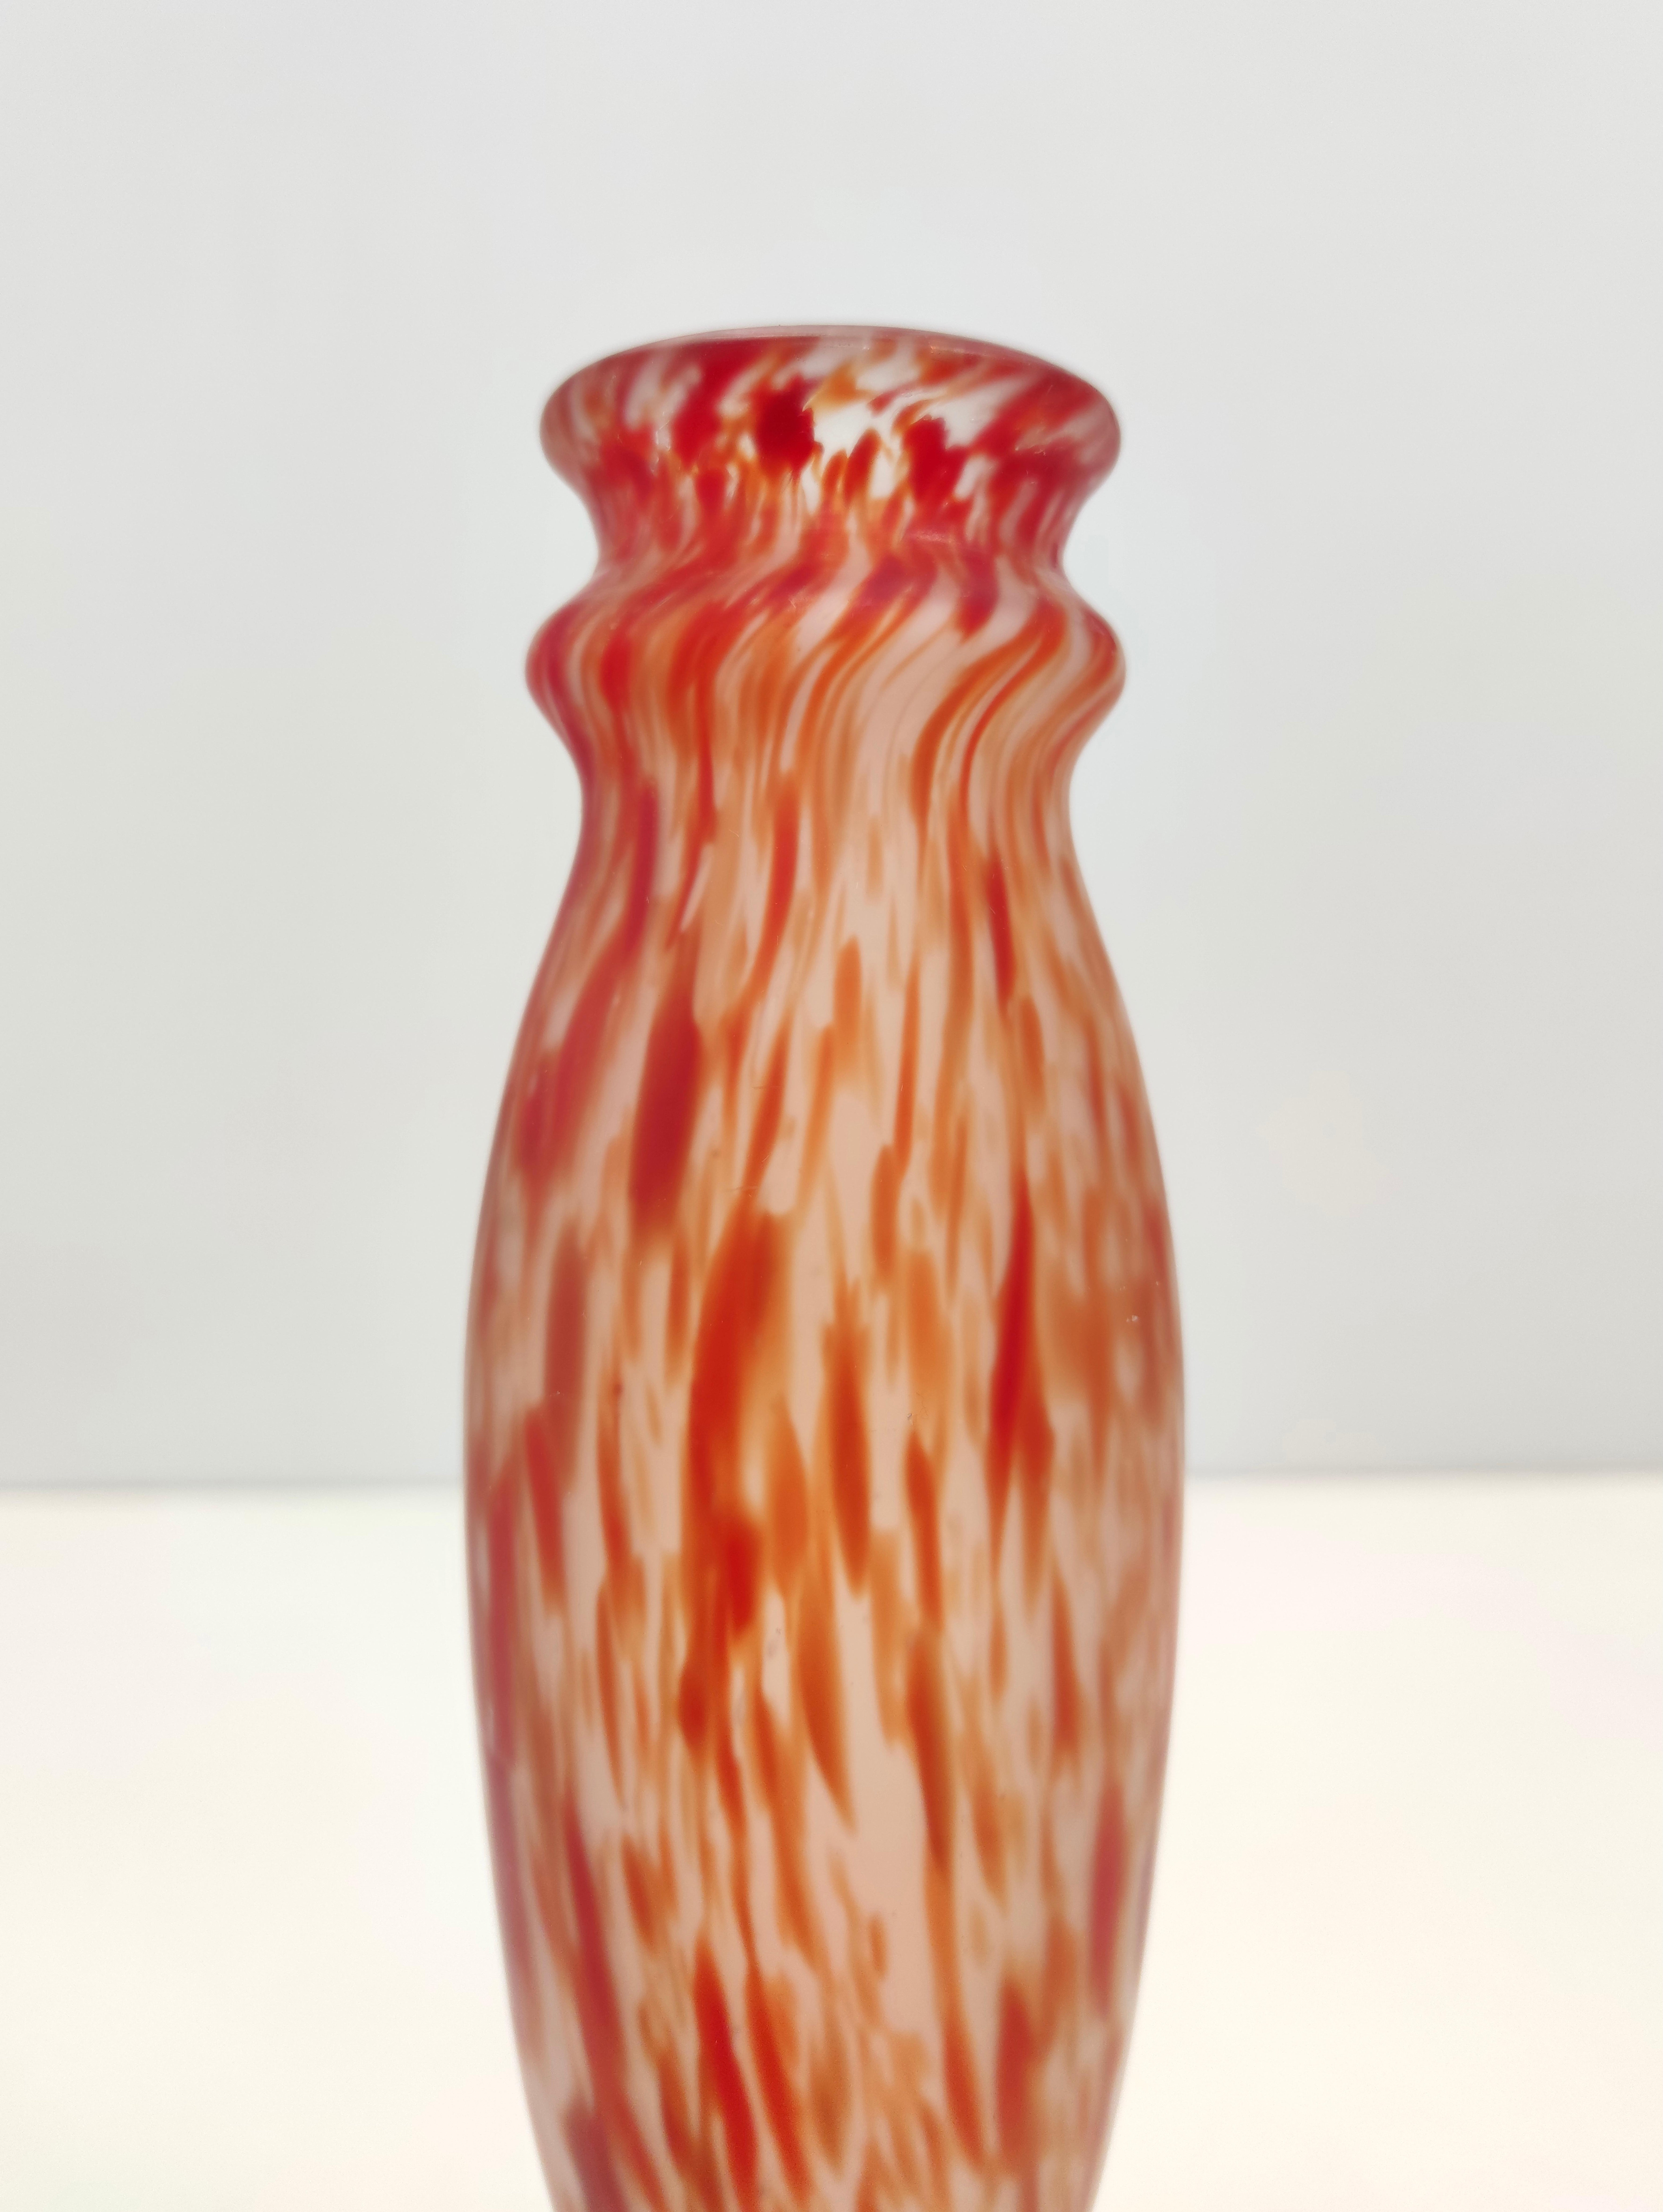 Late 19th Century Liberty Style Red / Orange Glass Vase by Legras, France